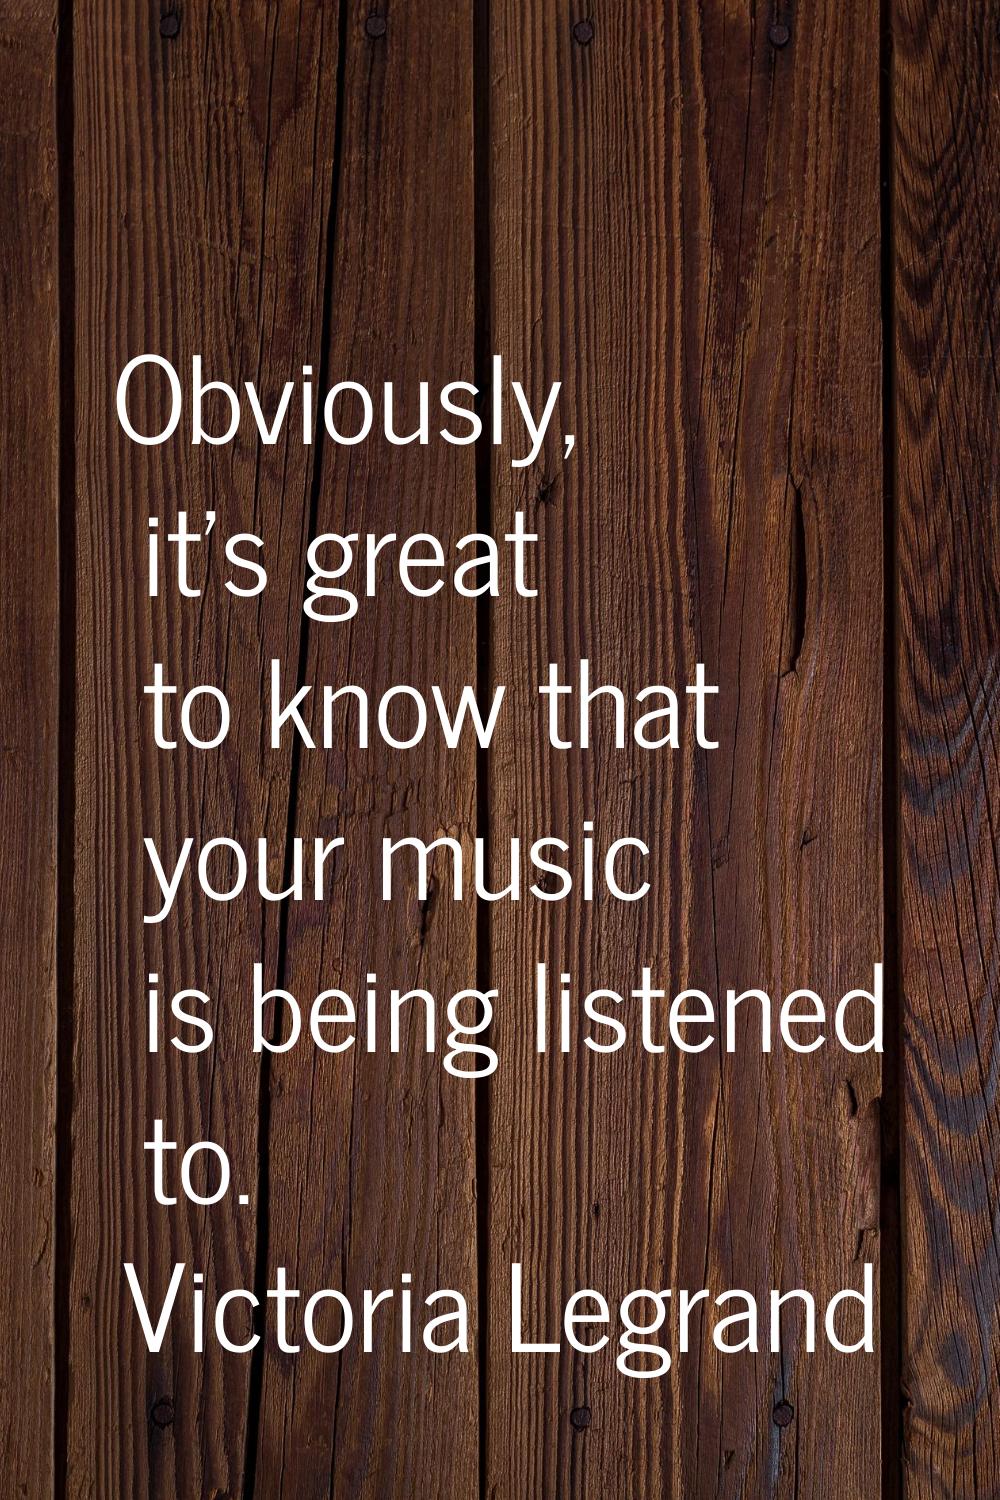 Obviously, it's great to know that your music is being listened to.